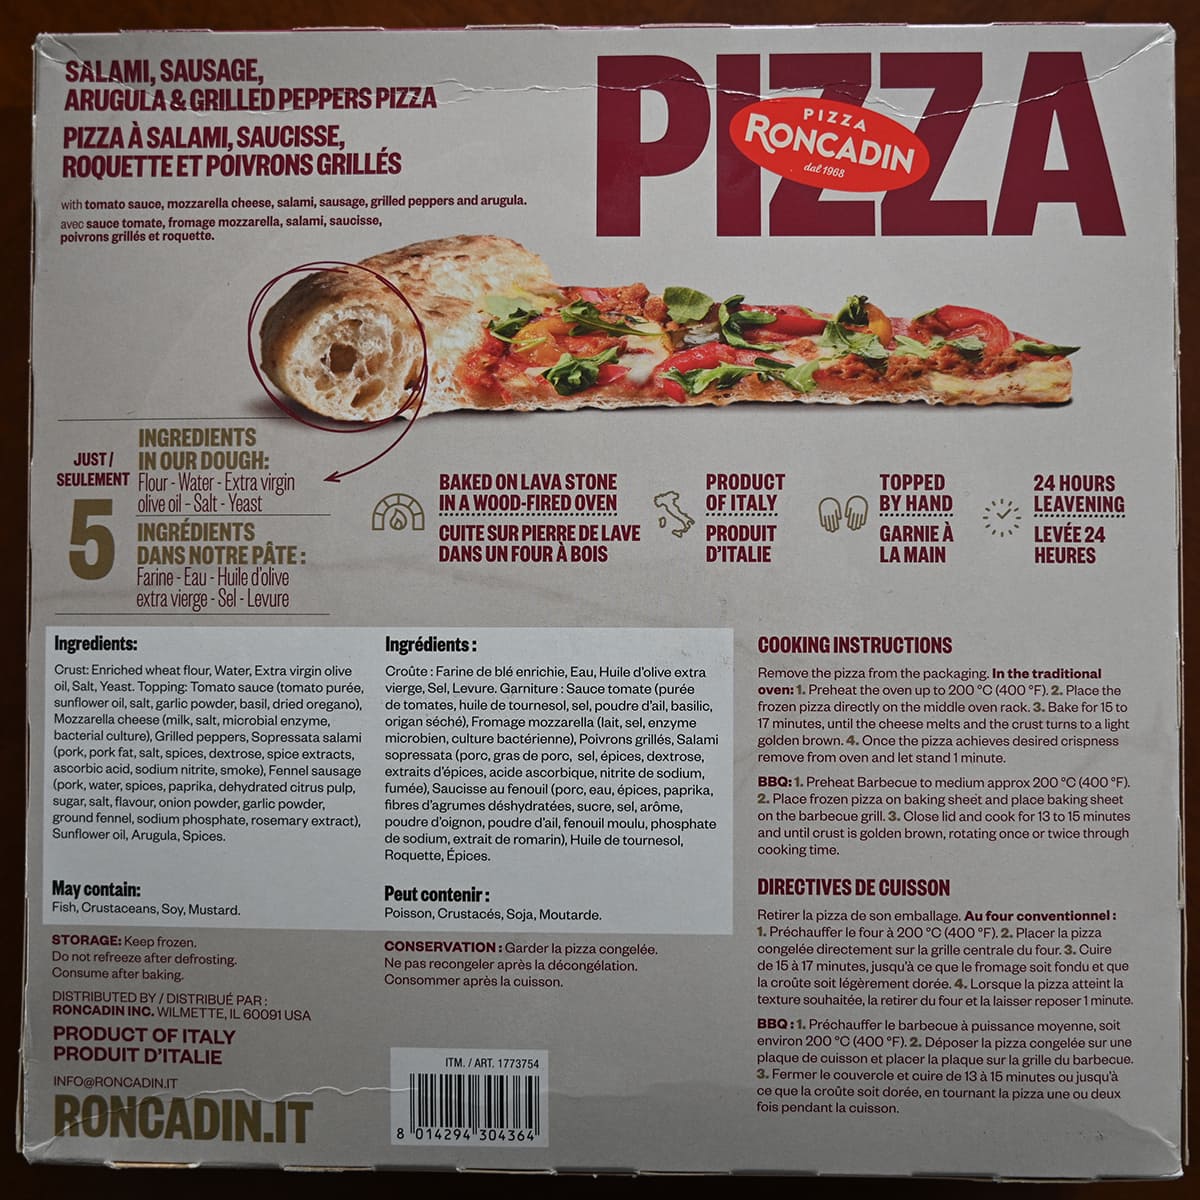 Top down image of the back of the Pizza Roncadin box showing nutrition facts, ingredients and cooking instructions and that it's a product of Italy.